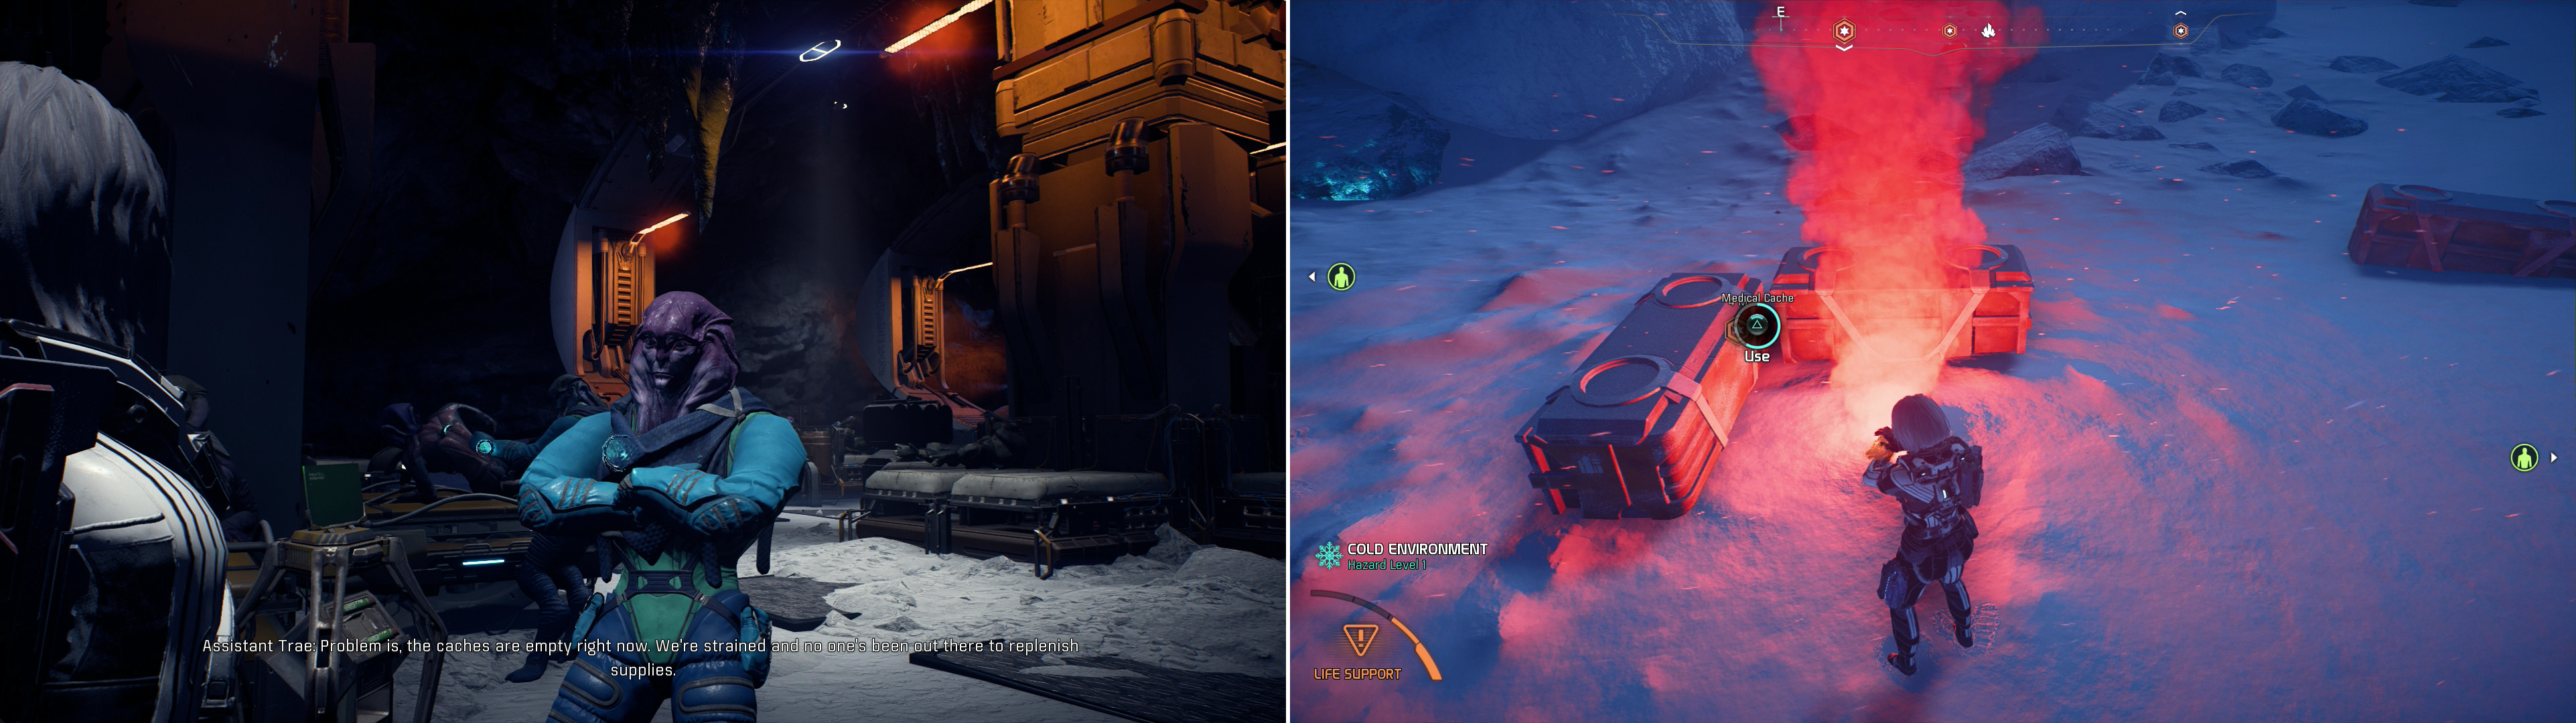 Talk to Dr. Harihn in the Resistance Base to hear about some depleted medical caches (left) then search the surface of Havarl and replenish them (right).